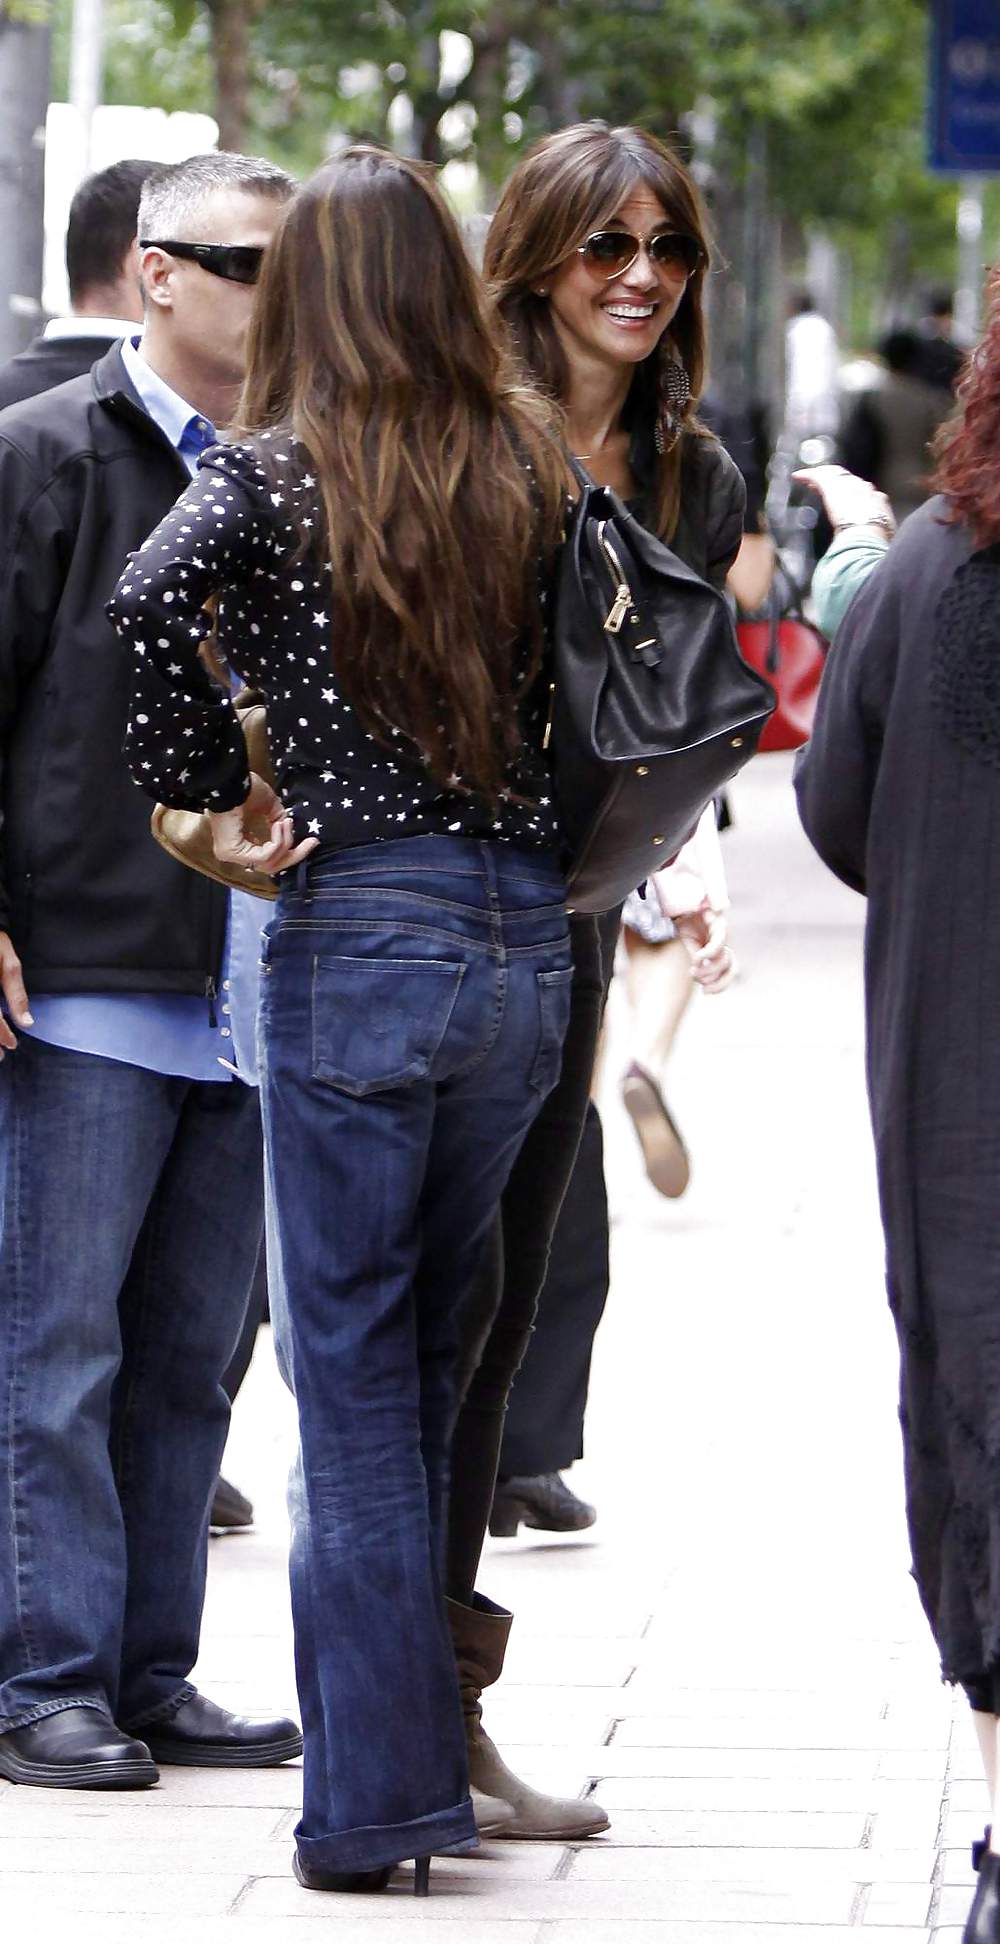 Penelope Cruz shopping with a friend in Madrid #3994444